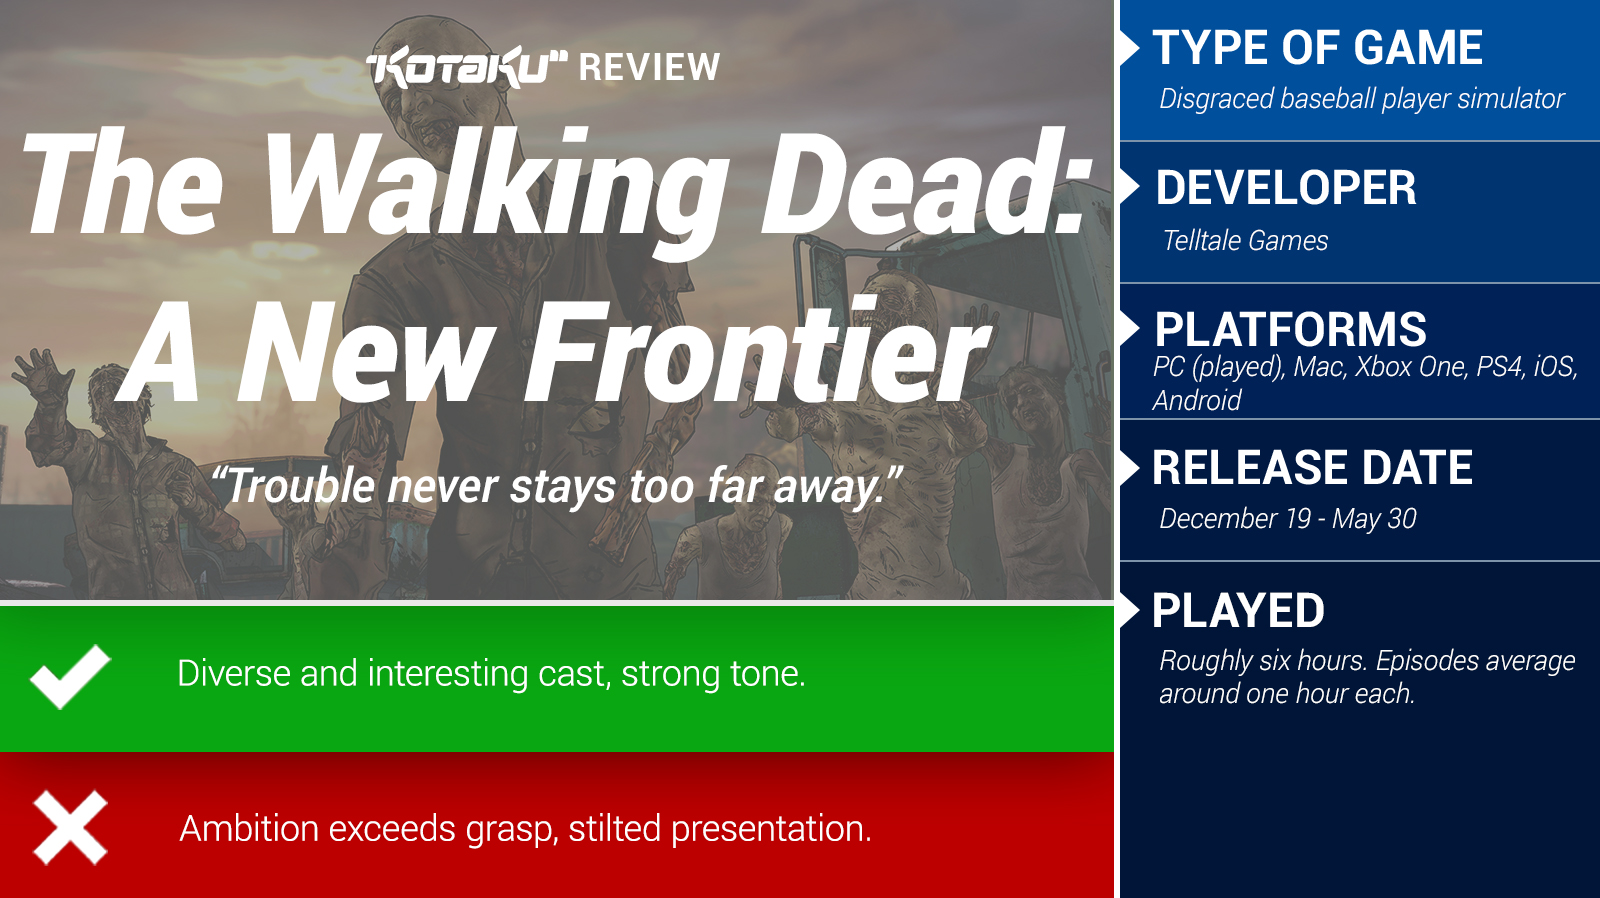 The Walking Dead: A New Frontier: The Kotaku Review